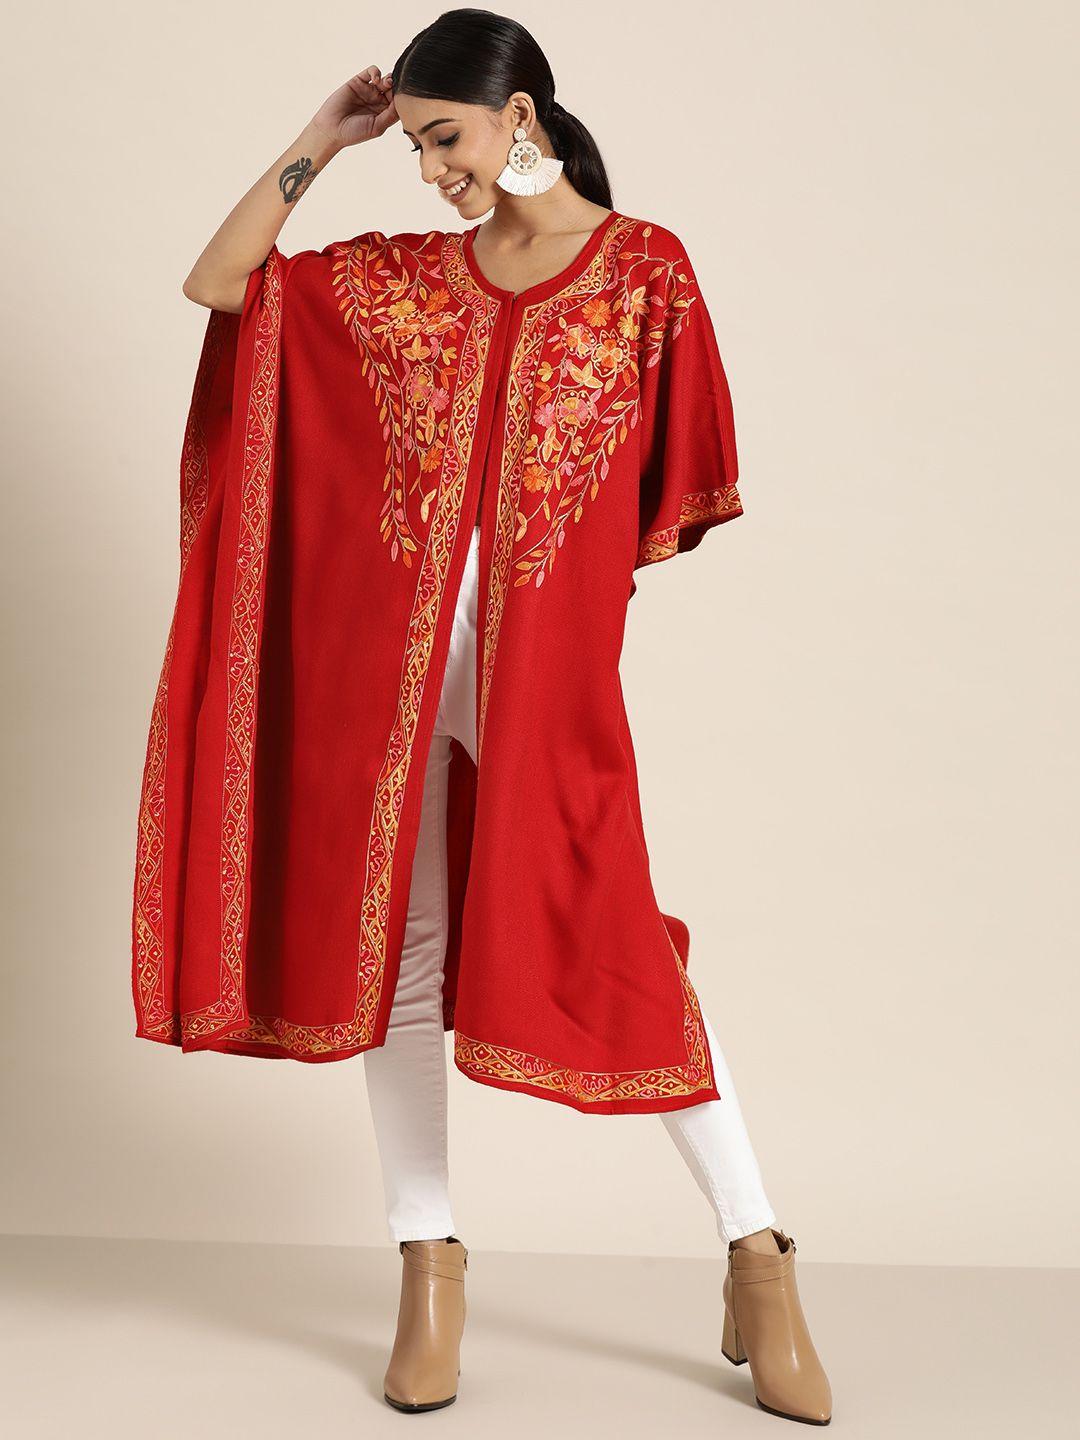 sangria women red & yellow floral embroidered extended sleeves winter kaftan kurta